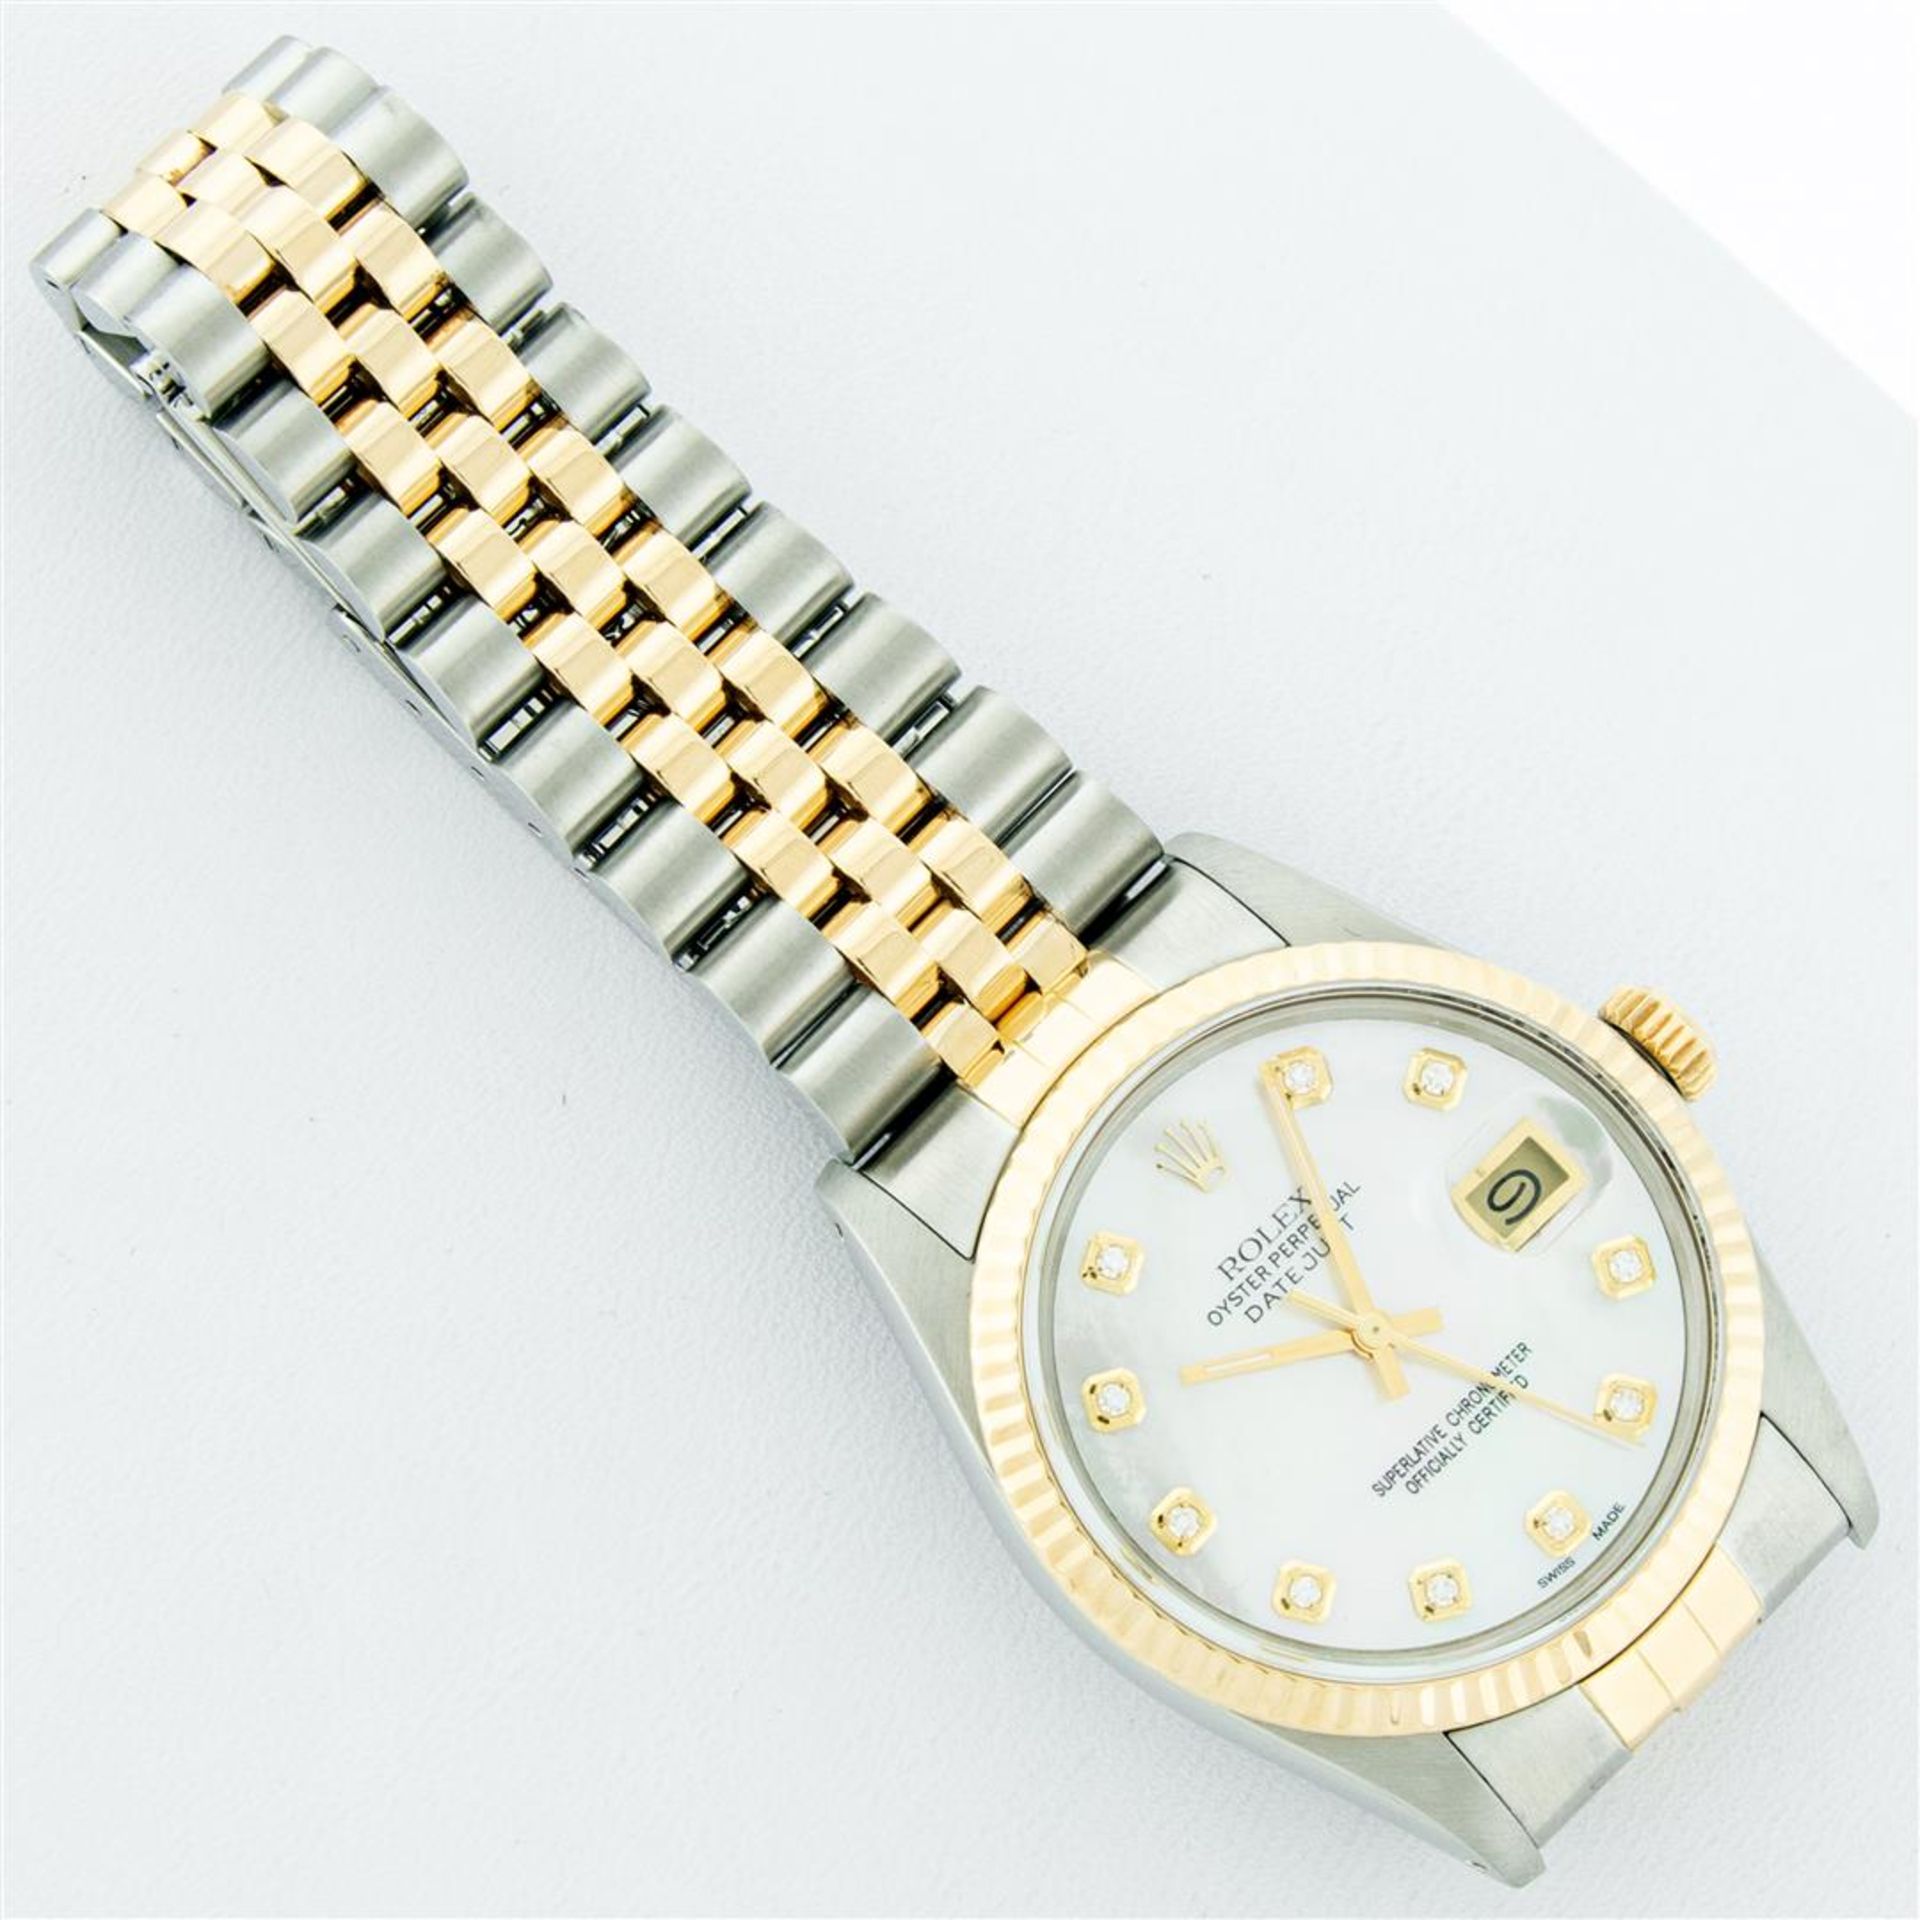 Rolex Mens 2 Tone Mother Of Pearl VS Diamond 36MM Datejust Wristwatch - Image 11 of 18